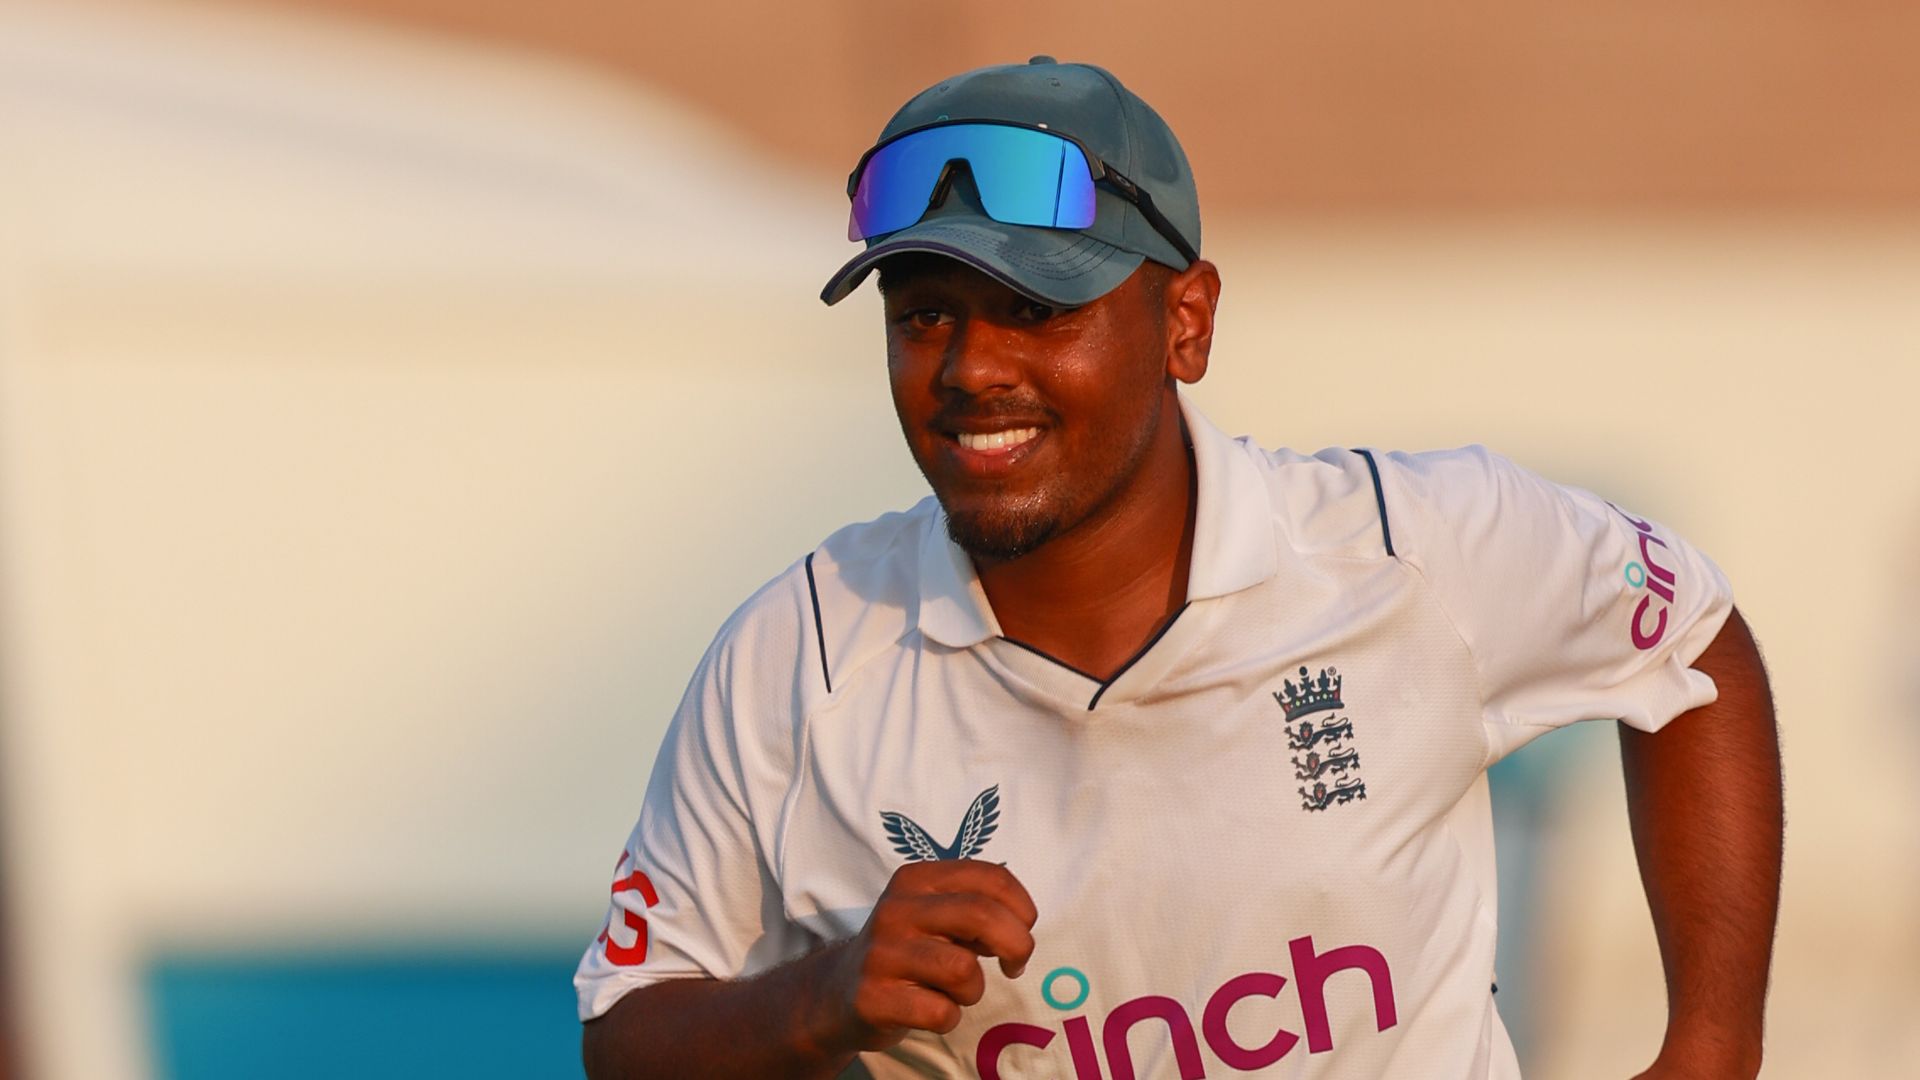 Ahmed, 18, to become England's youngest men's Test cricketer